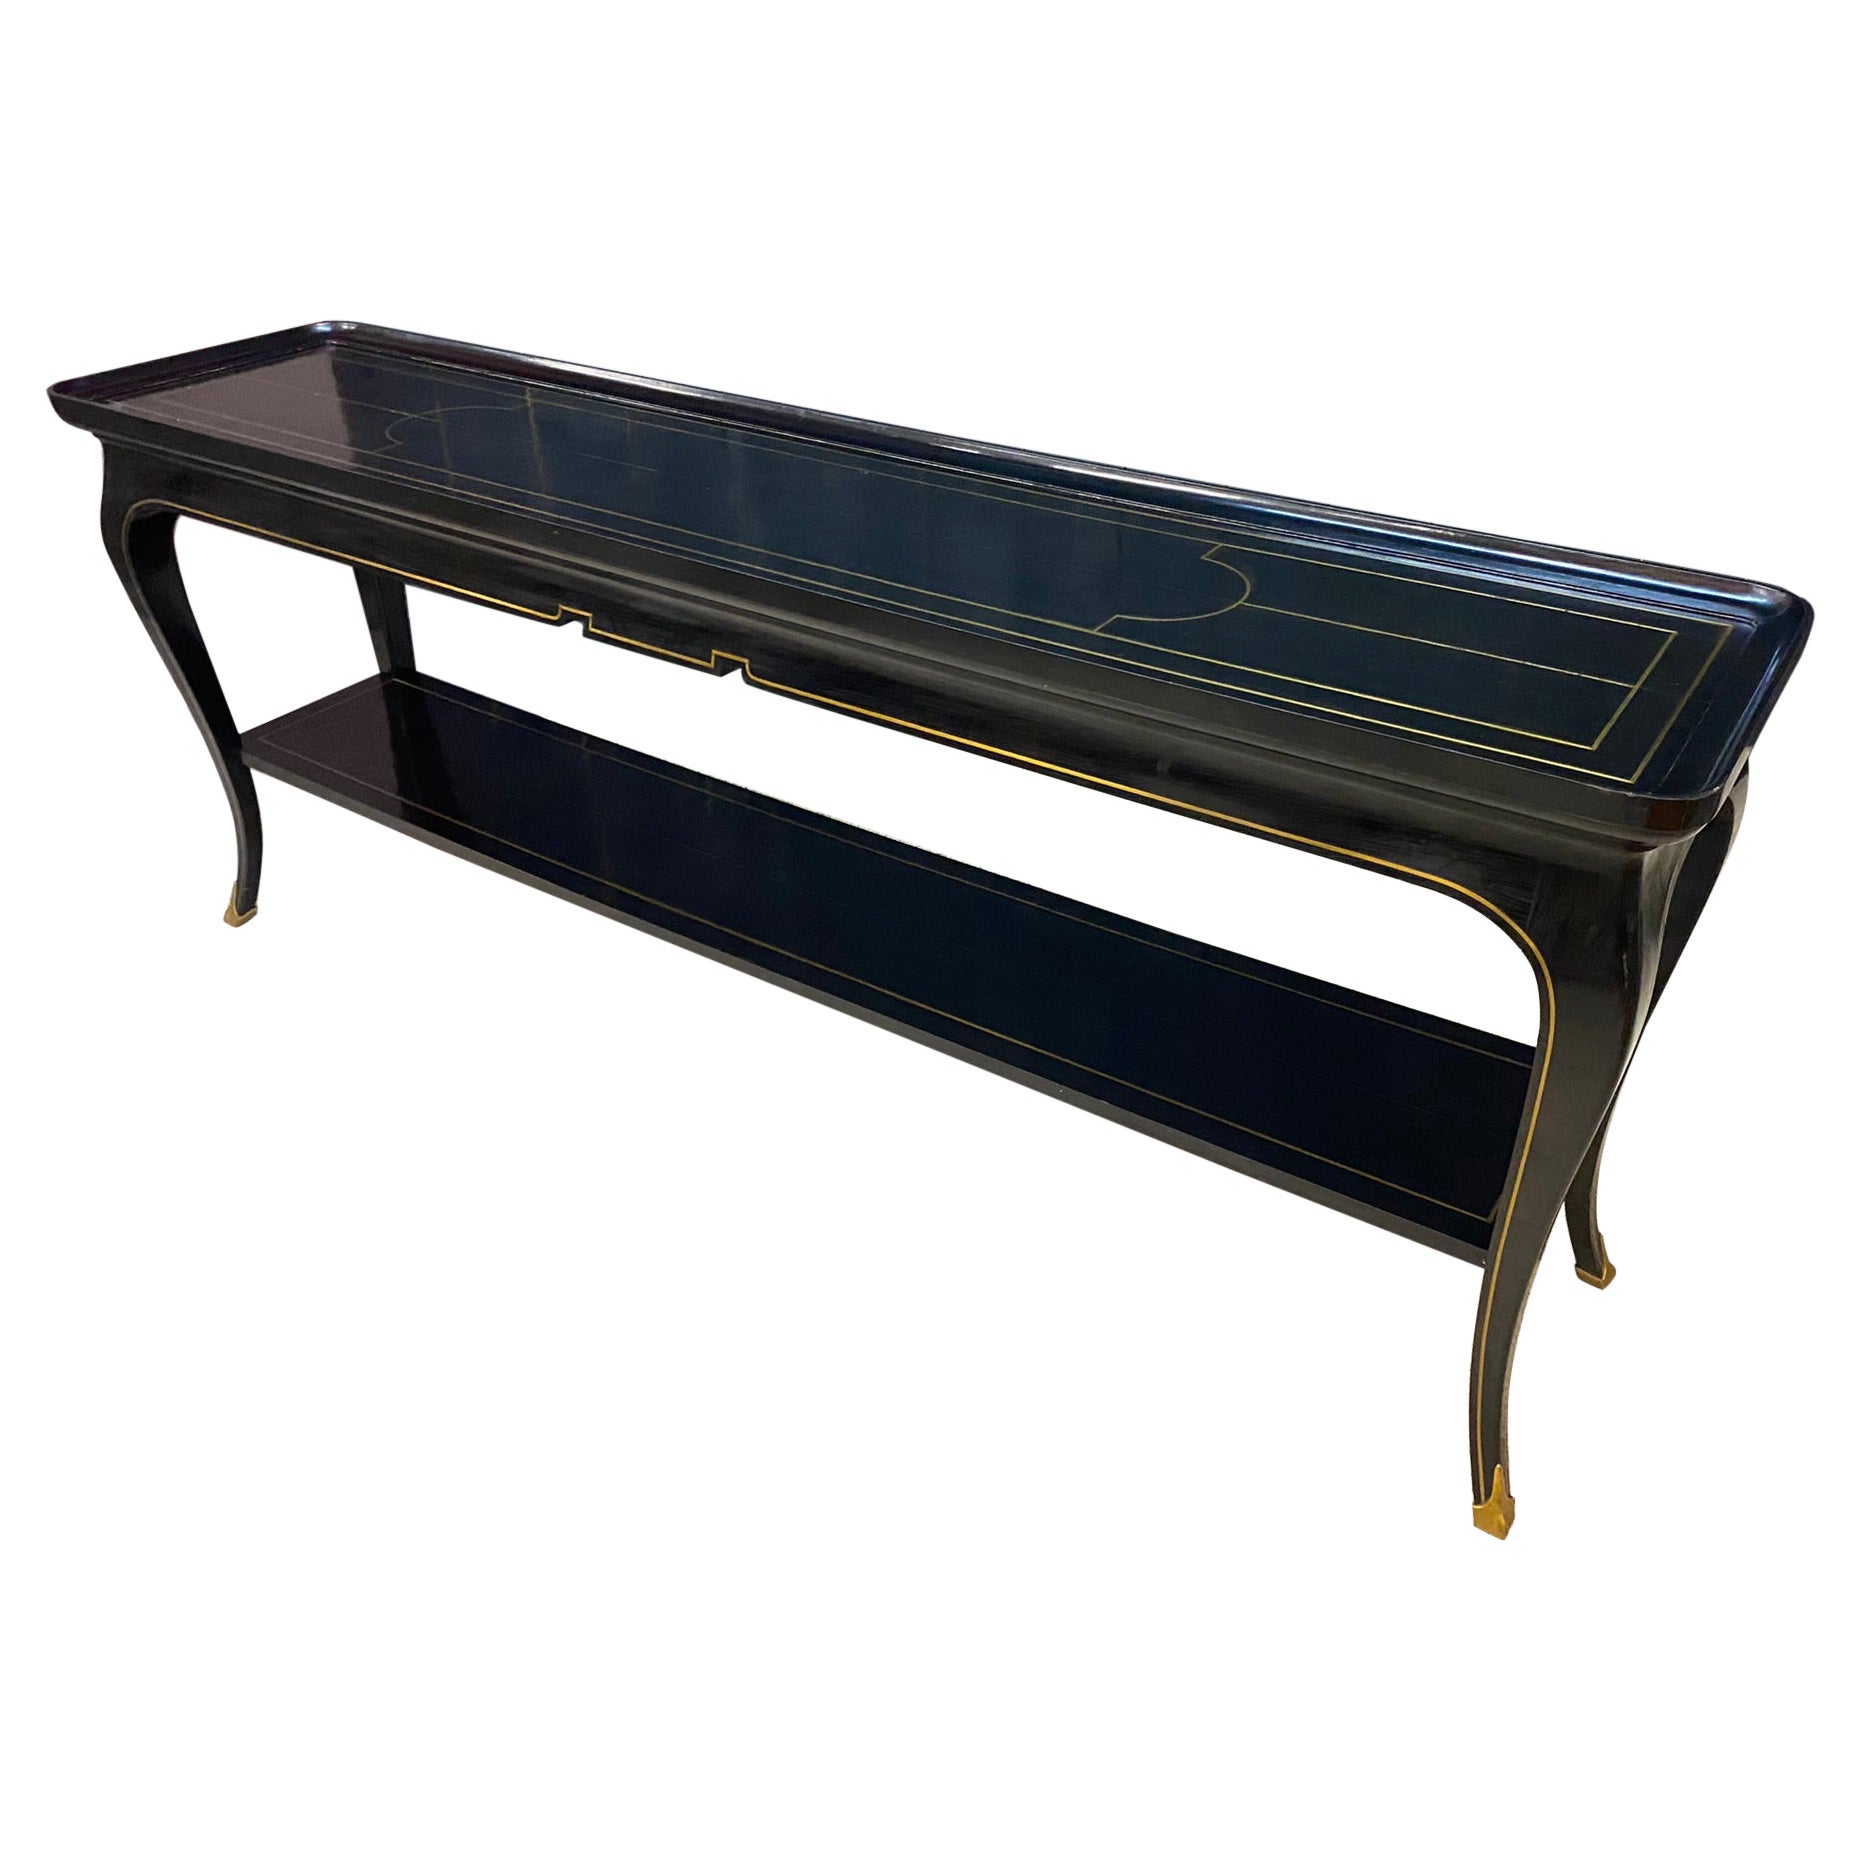 Maison Jansen, Exceptional Large Neo Classic Console Table, circa 1950/1960